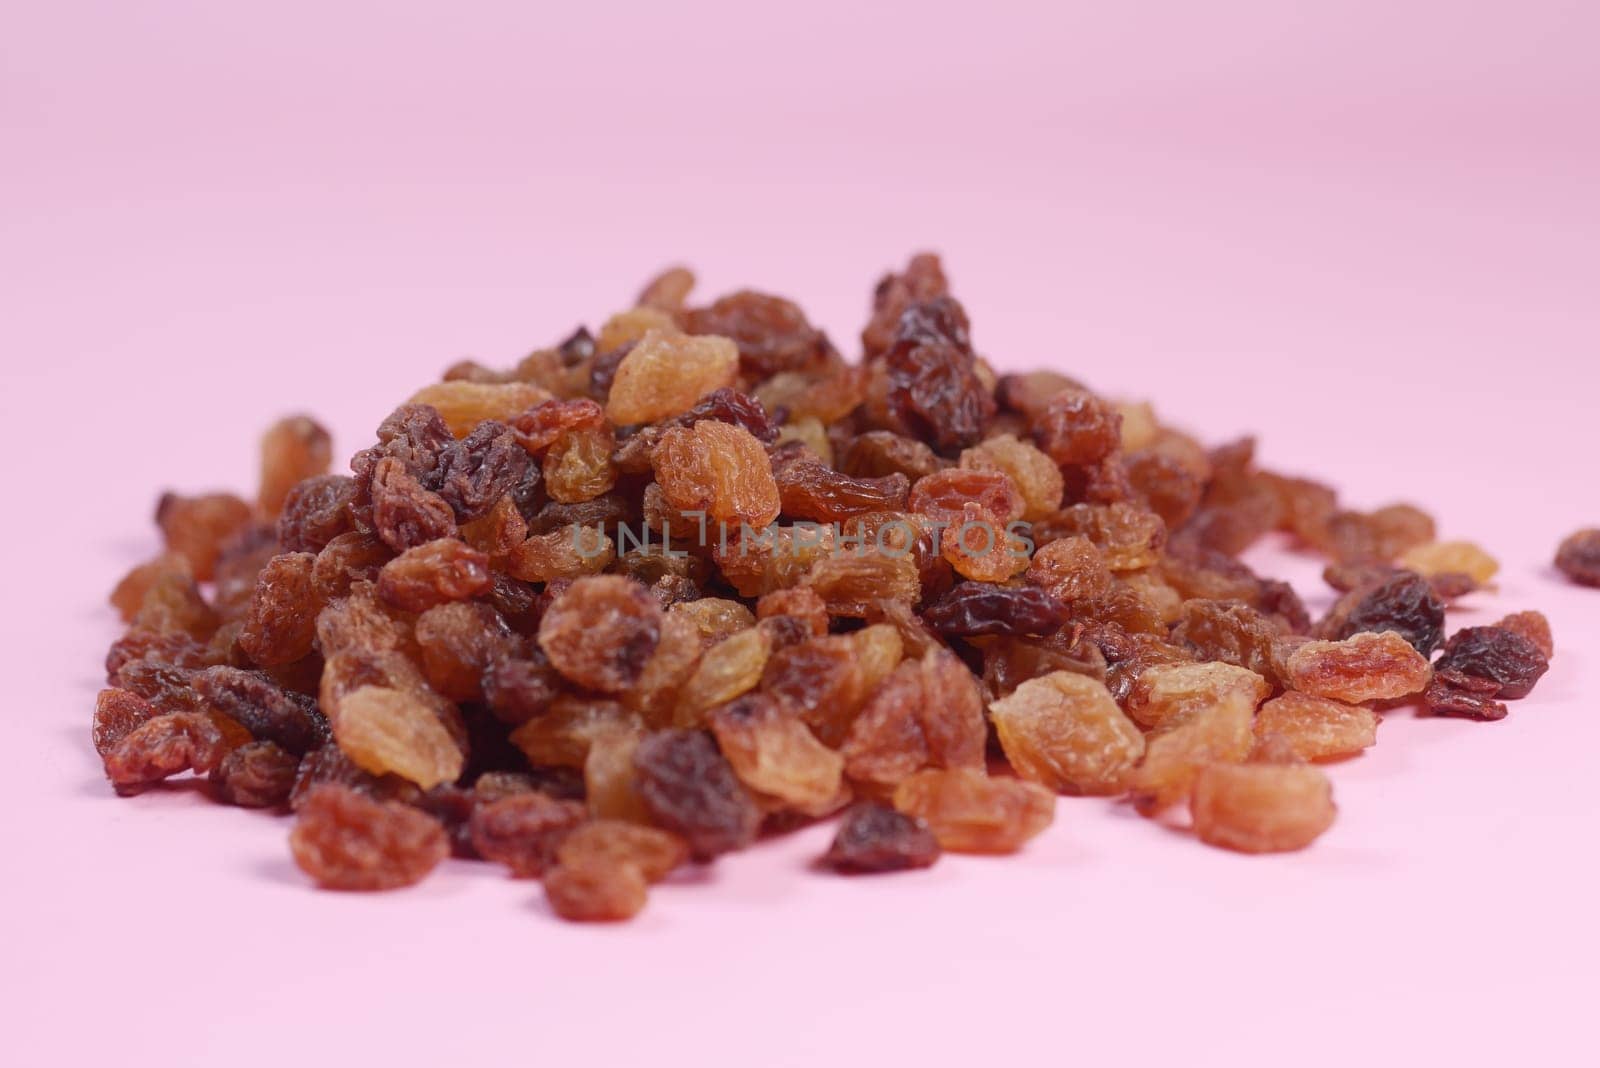 brown raisin on pink background, close up, by towfiq007